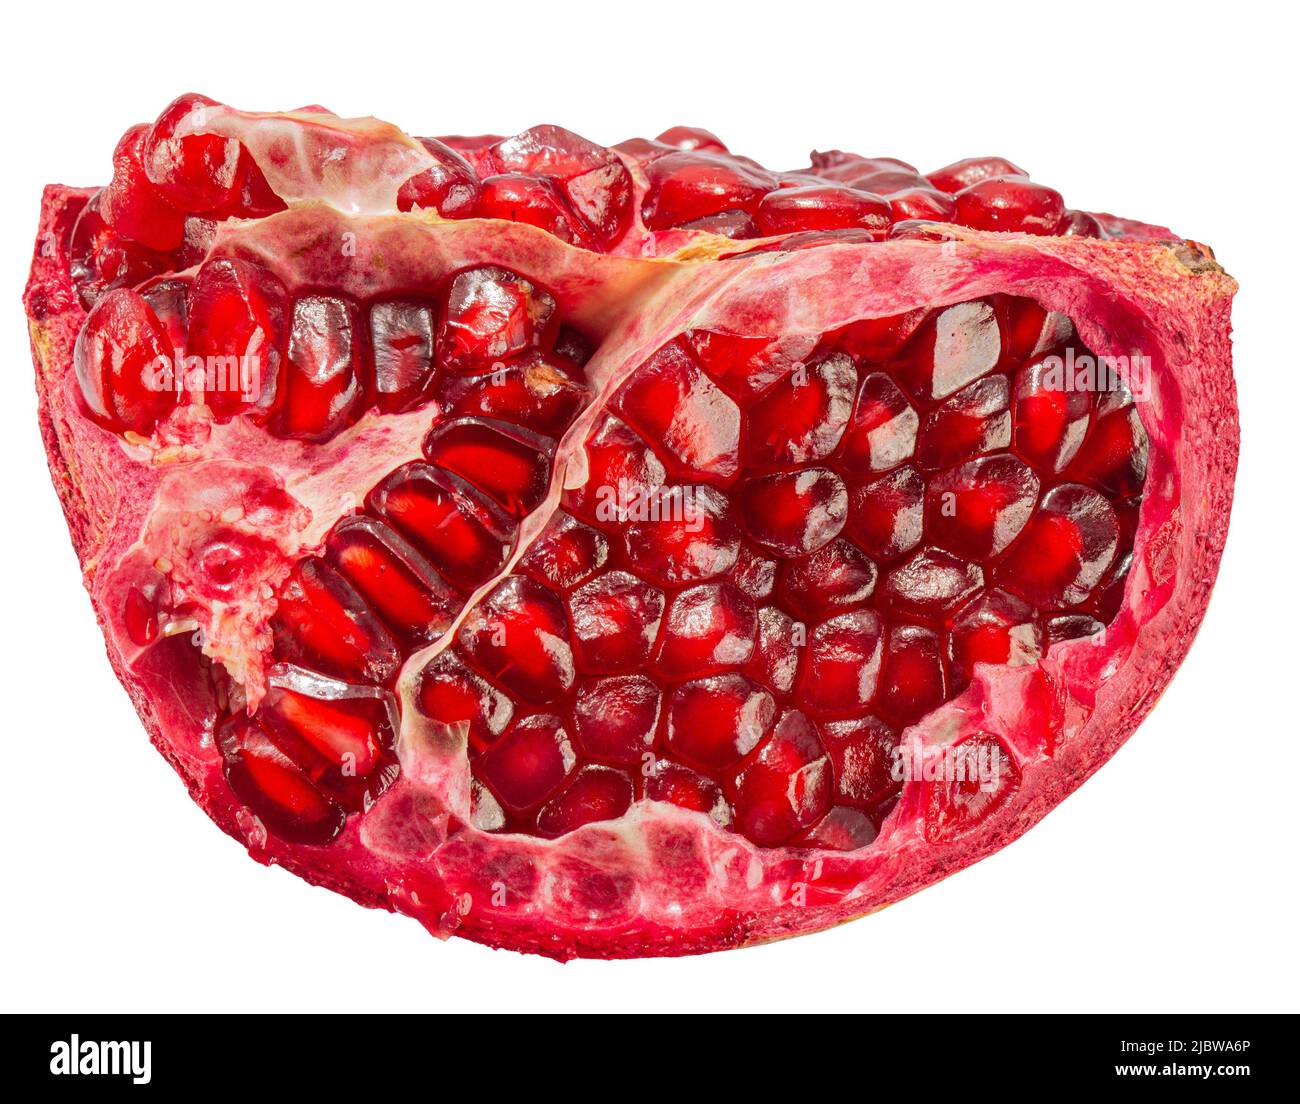 pomegranate slice with red seeds isolated on a white background with clipping path. Stock Photo